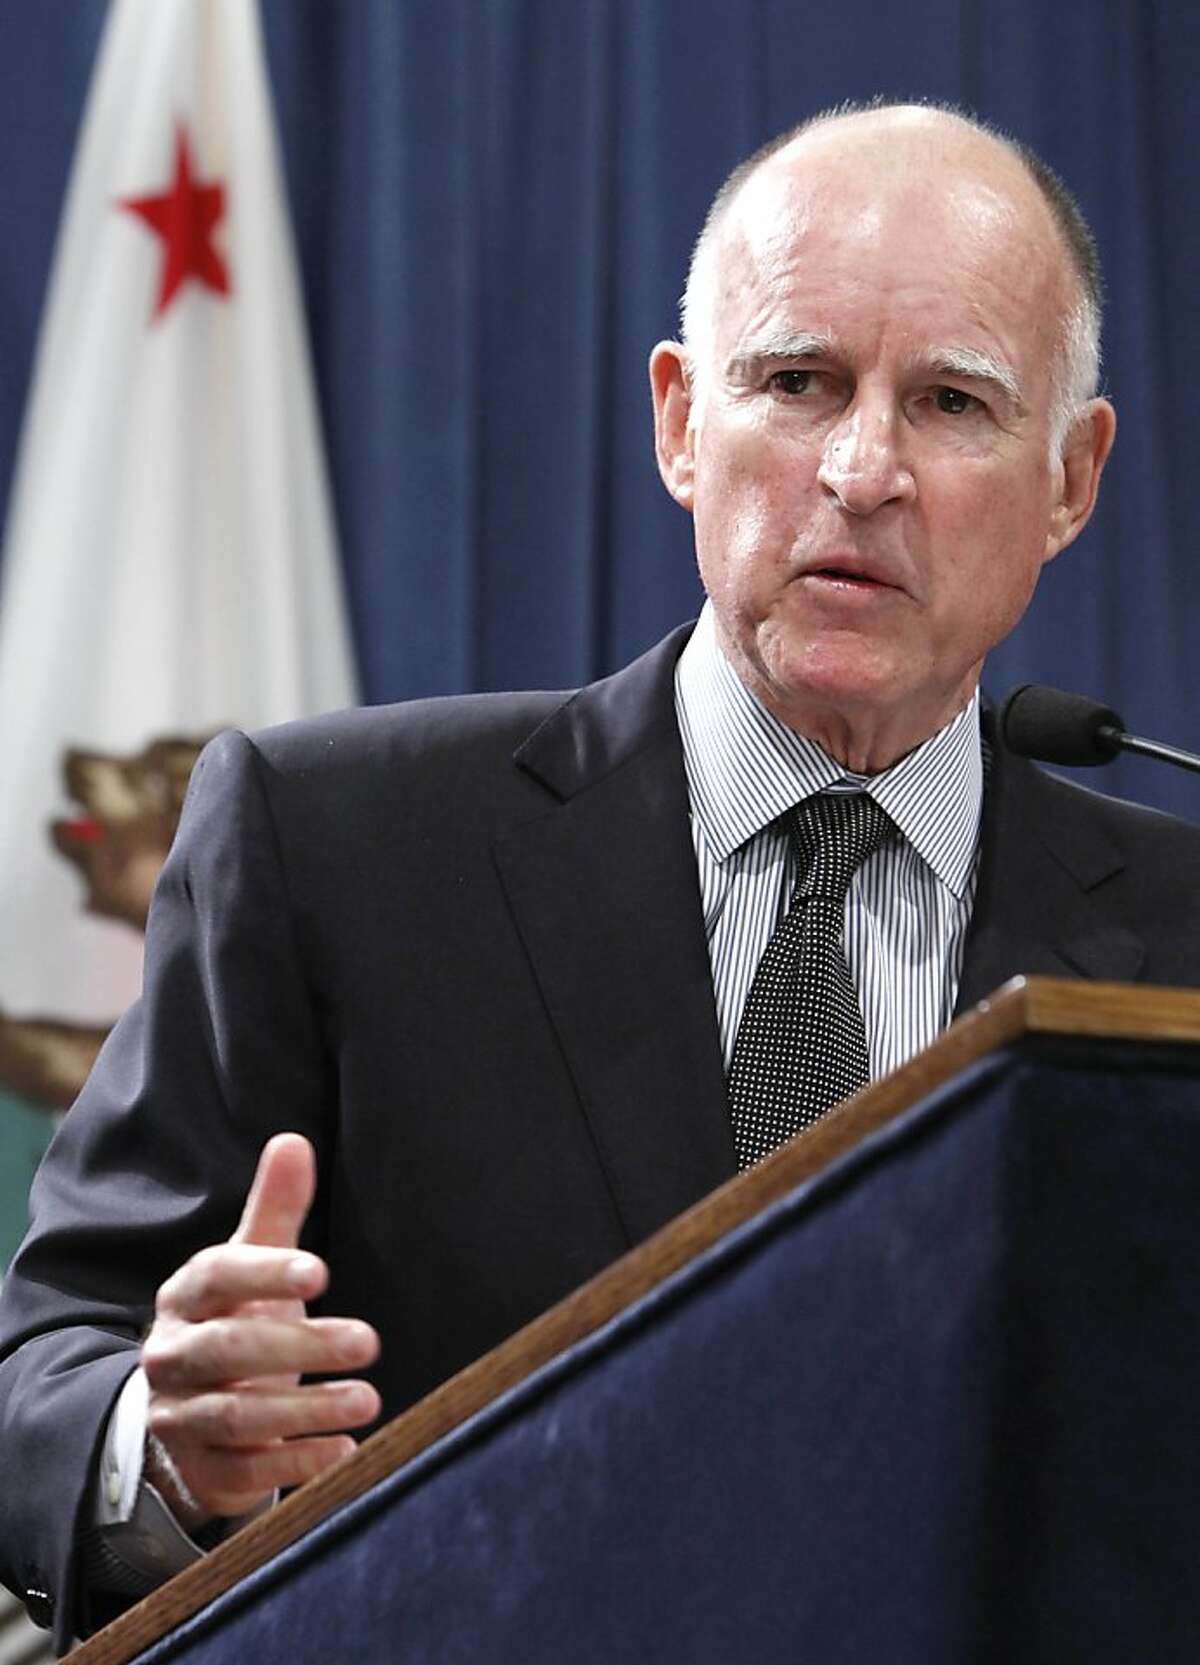 Gov. Jerry Brown discusses his proposal to rollback public employee pension benefits during a news conference at the Capitol in Sacramento, Calif., Thursday, Oct. 27, 2011. Brown's plan, which would require approval from the Legislature, would raise the retirement age to 67 for new employees, who are not public safety workers and require state and local employees to pay more toward their retirement and health care. The governor also proposes a mandatory 'hybrid" system in which future retirees would get their retirement from a guaranteed benefit and a 401(k)-style plan.(AP Photo/Rich Pedroncelli) Ran on: 11-14-2011 Gov. Jerry Brown plans to put a tax increase on the ballot.